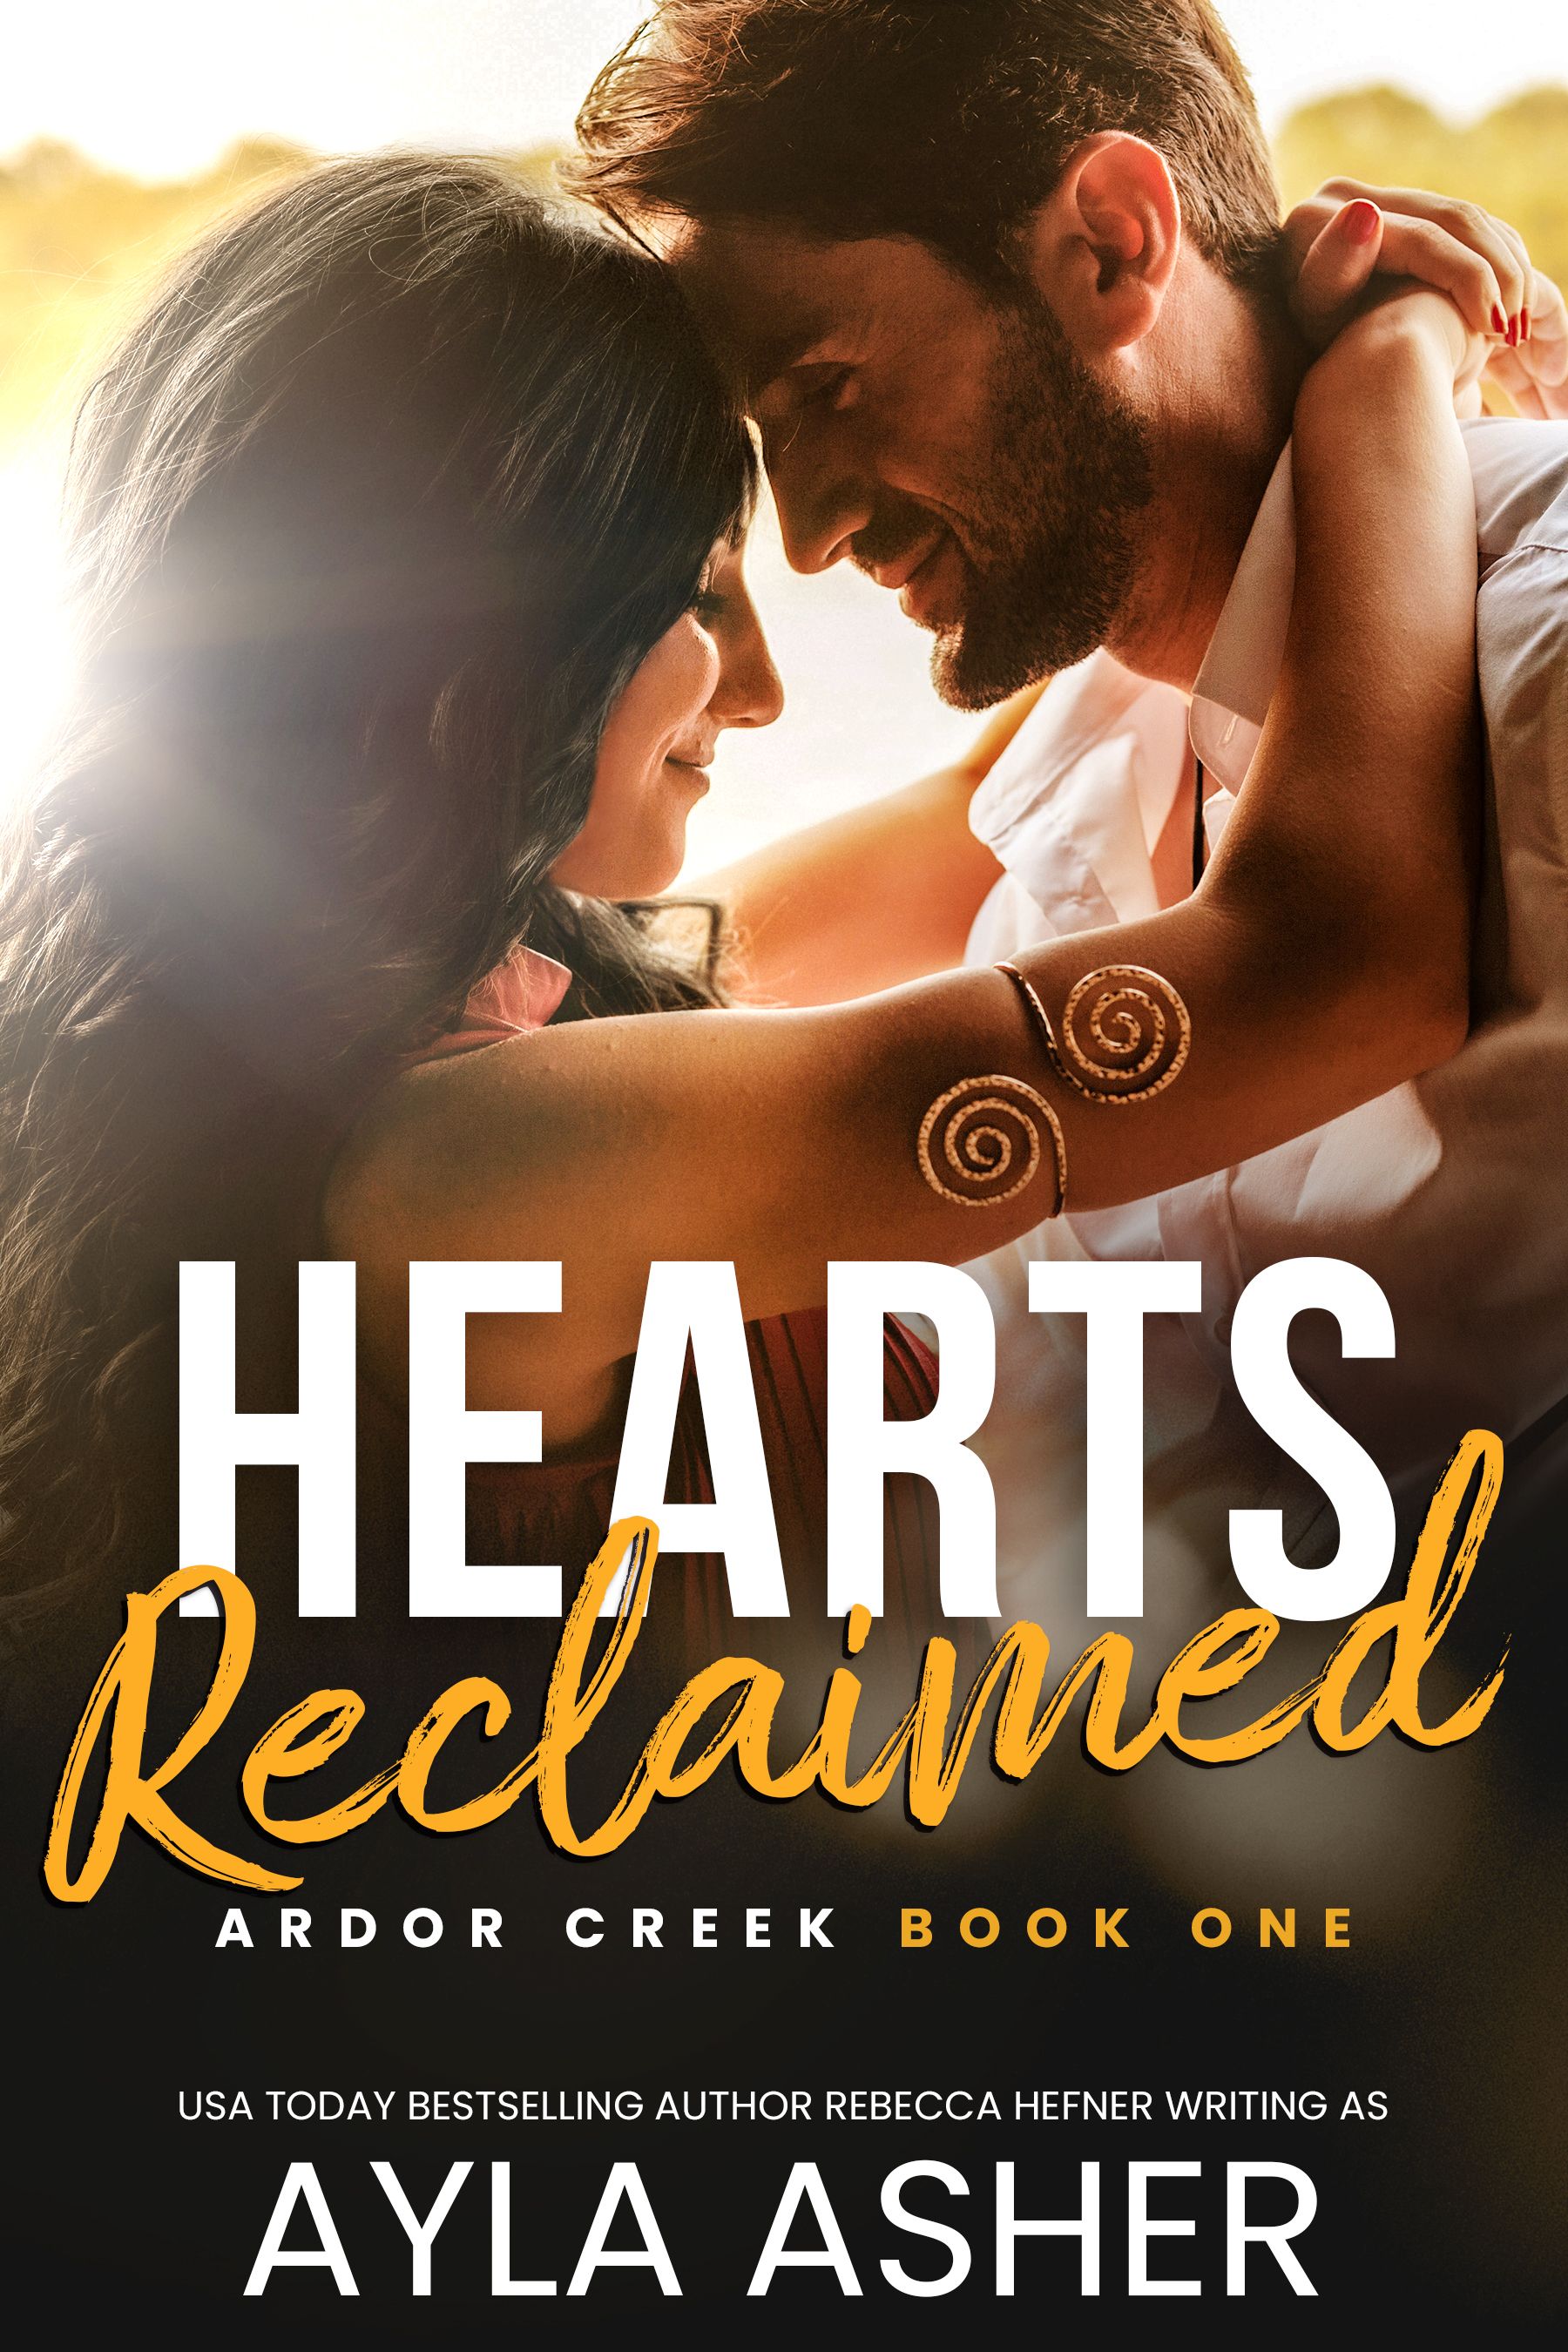 Hearts Reclaimed - Steamy Small Town Romance by Ayla Asher